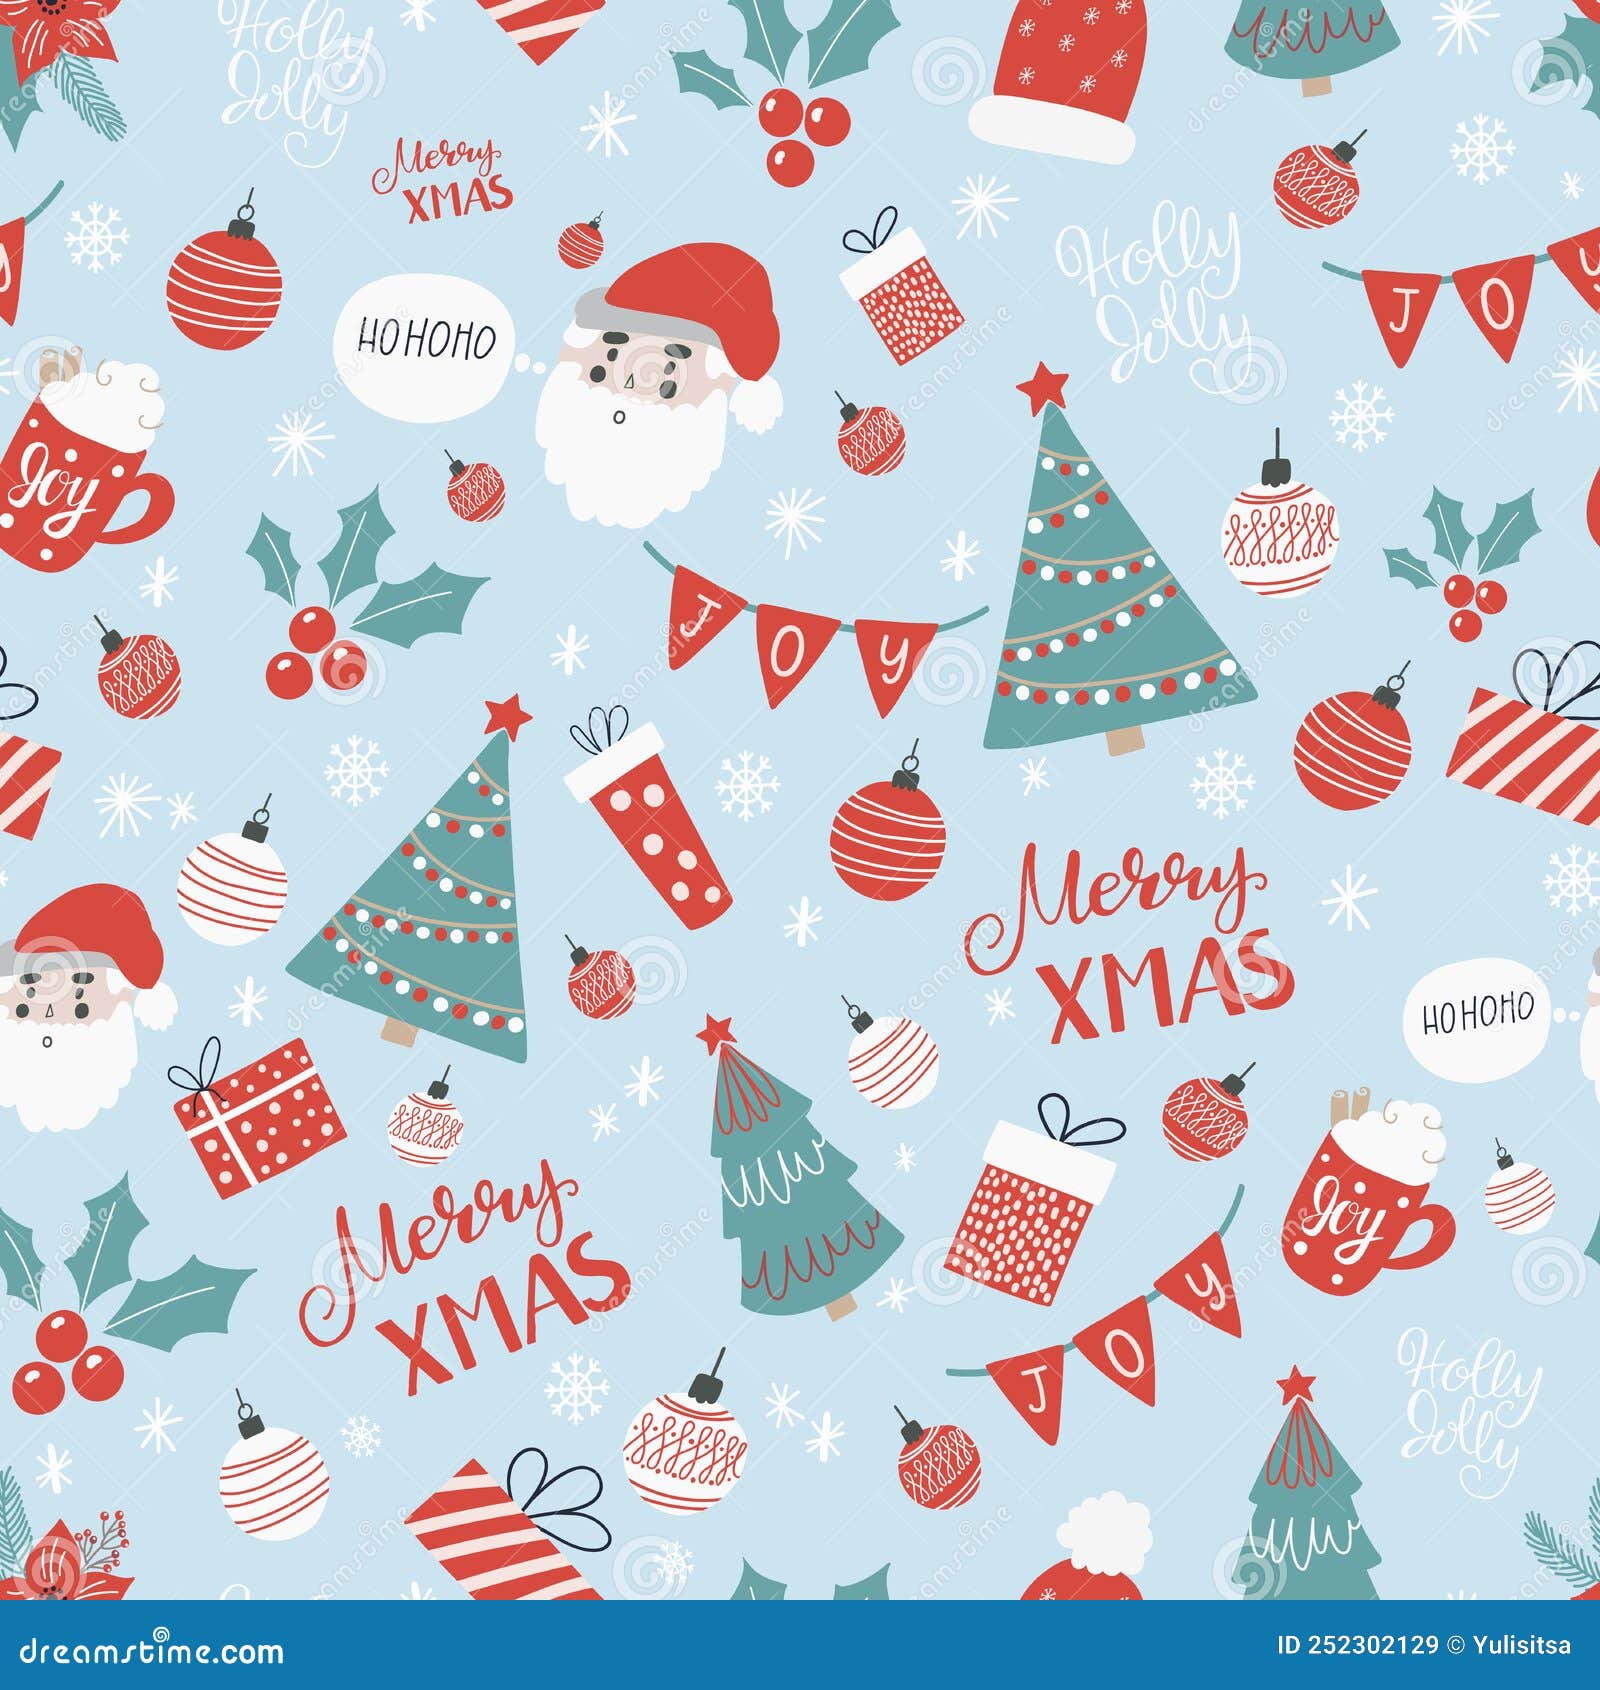 Christmas and New Year Seamless Pattern Made with Various Elements ...